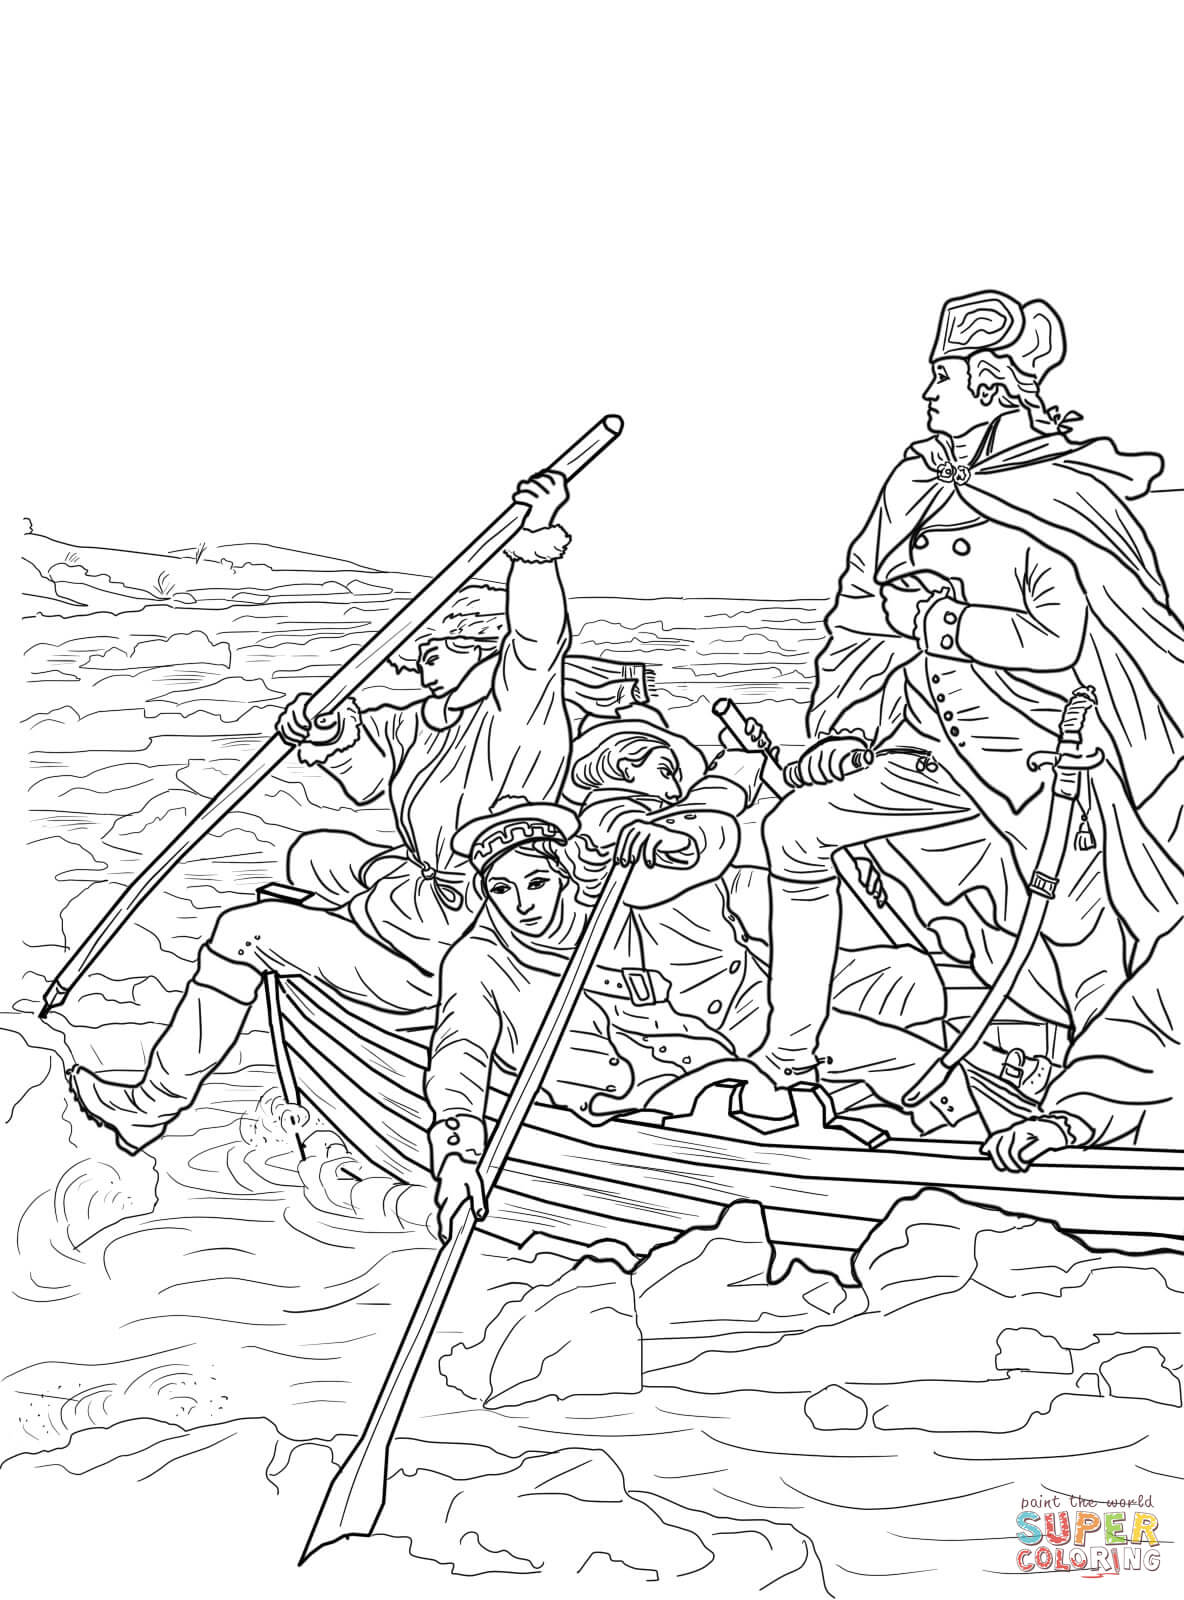 George Washington Crossing the Delaware coloring page | Free ...